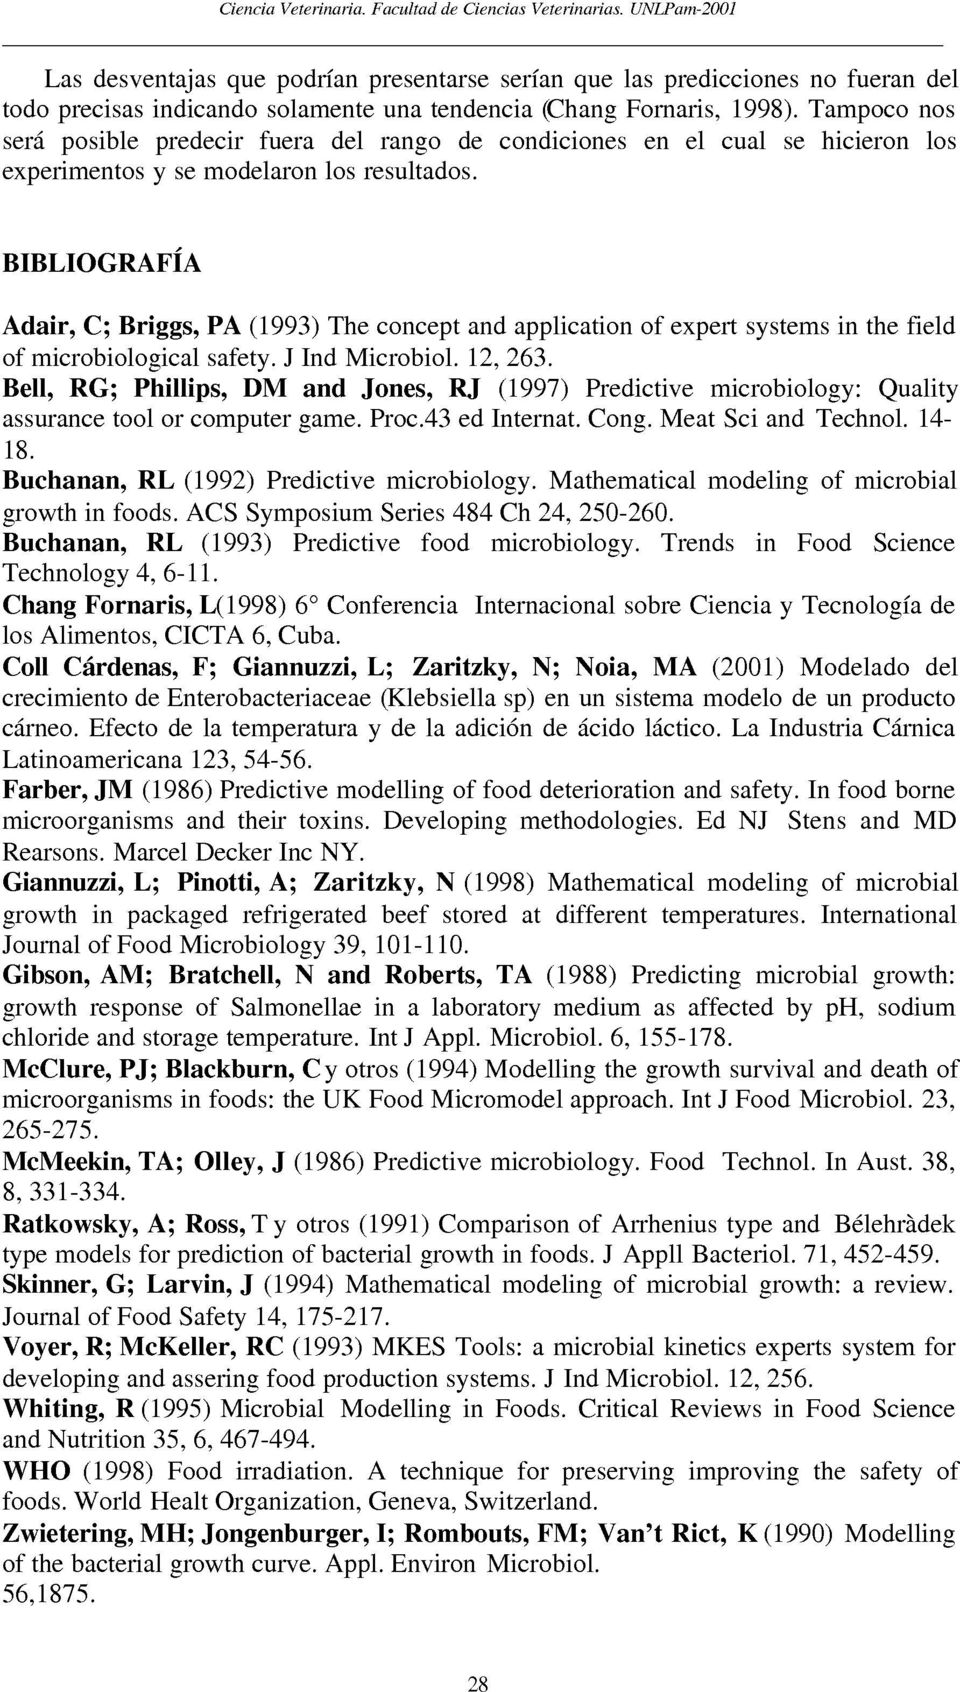 BIBLIOGRAFÍA Adair, C; Briggs, PA (1993) The concept and application of expert systems in the field of microbiological safety. J Ind Microbiol. 12, 263.